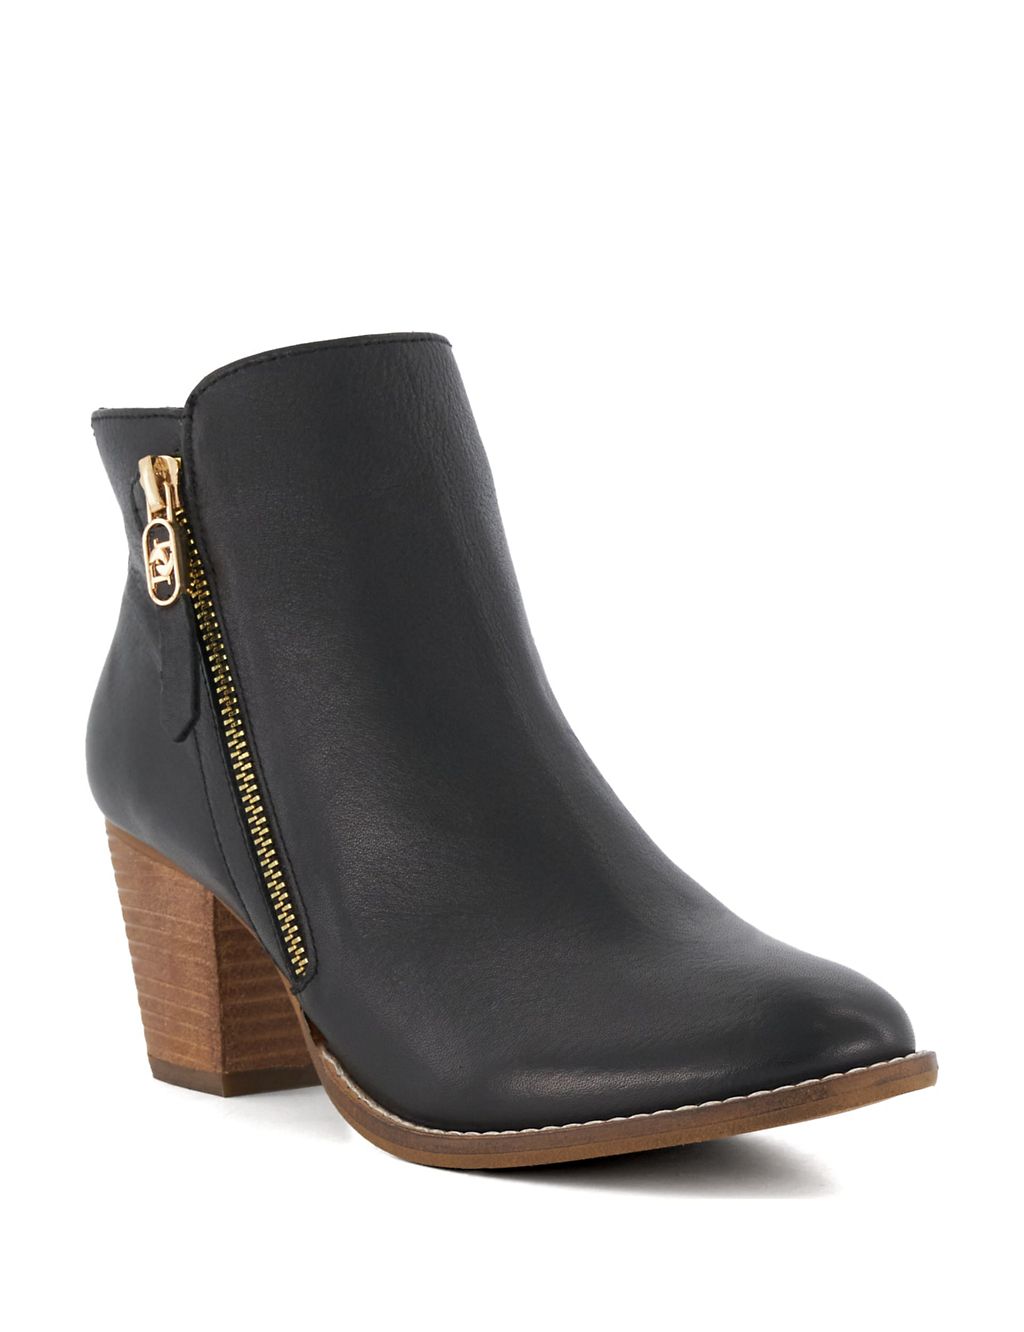 Suede Block Heel Round Toe Ankle Boots 1 of 4